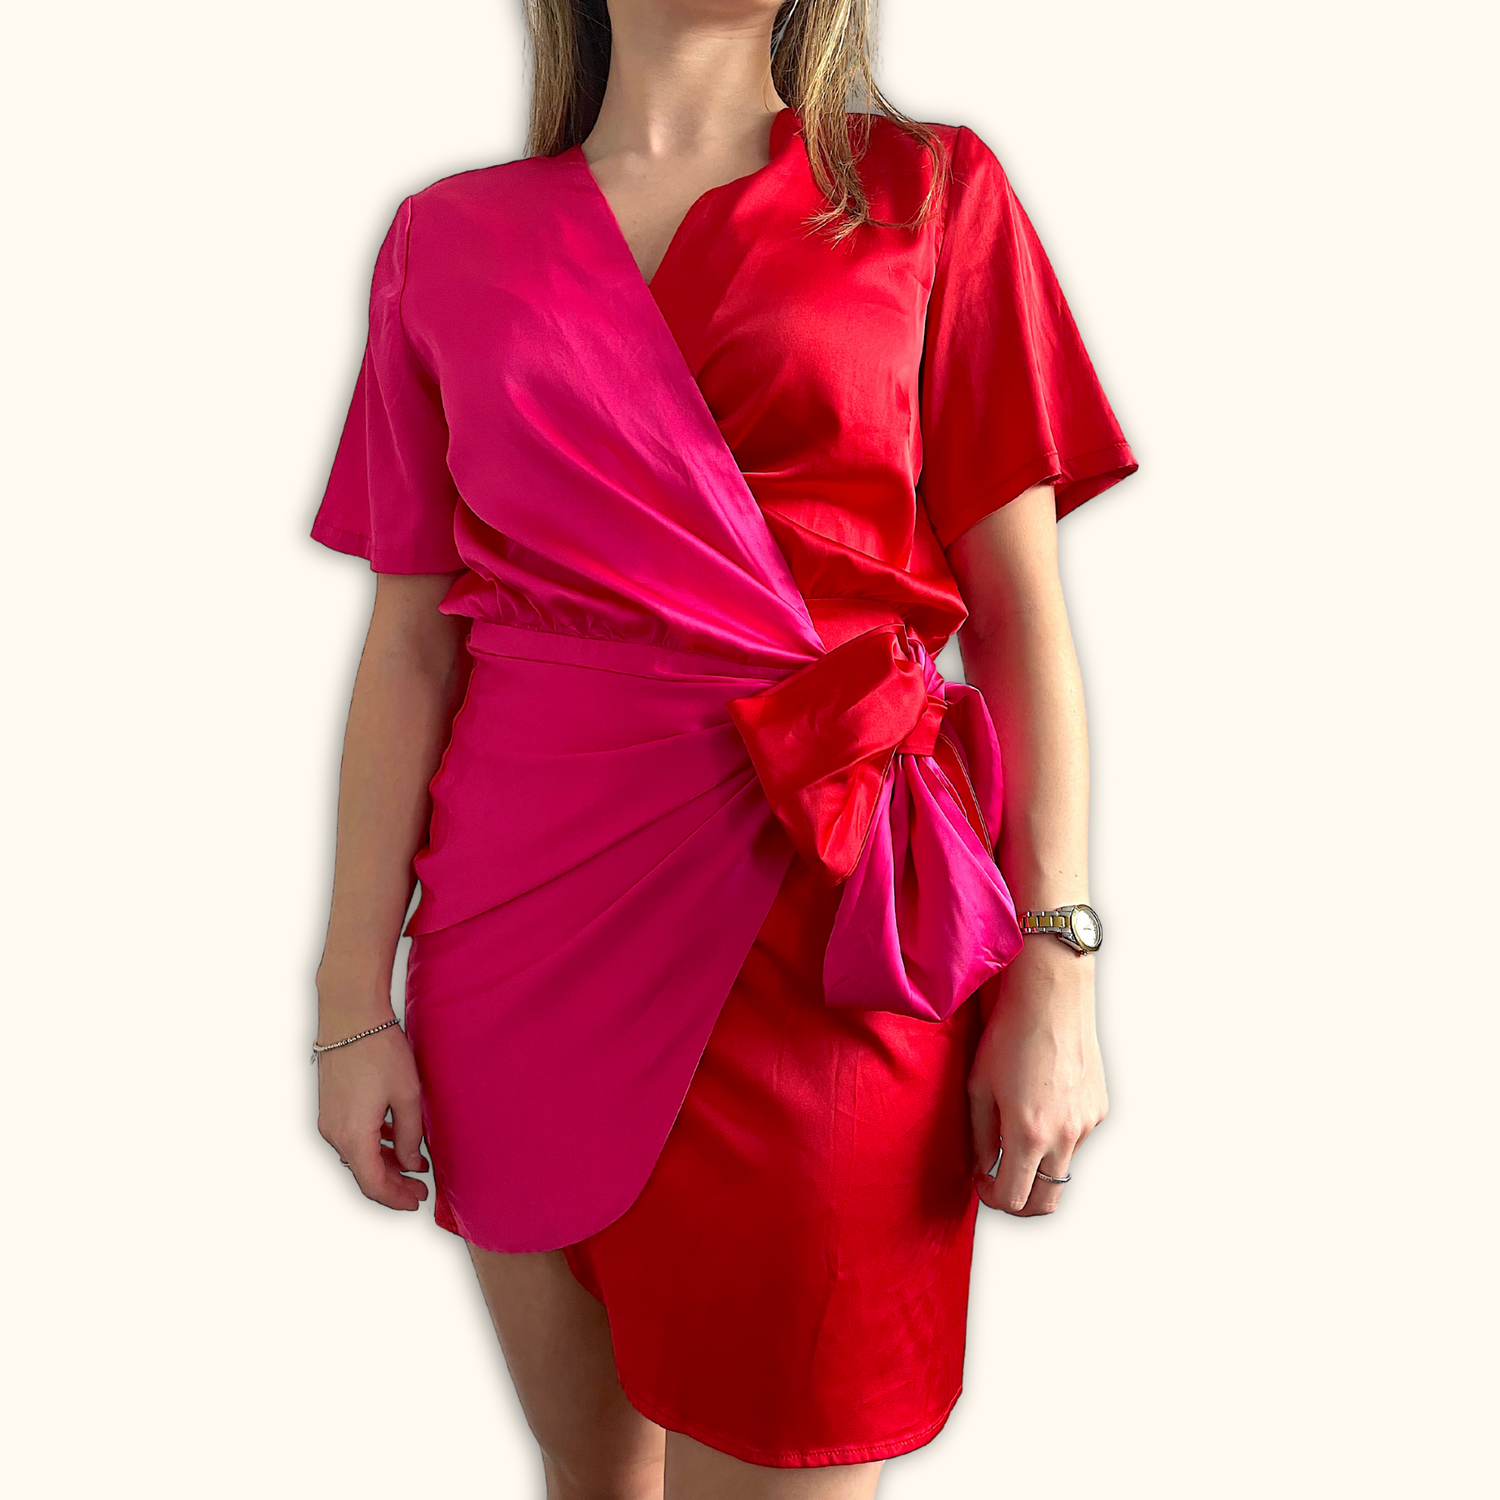 Never Fully Dressed Pink and Red Wrap Mini Dress - Size Medium - Never fully dressed - Dresses